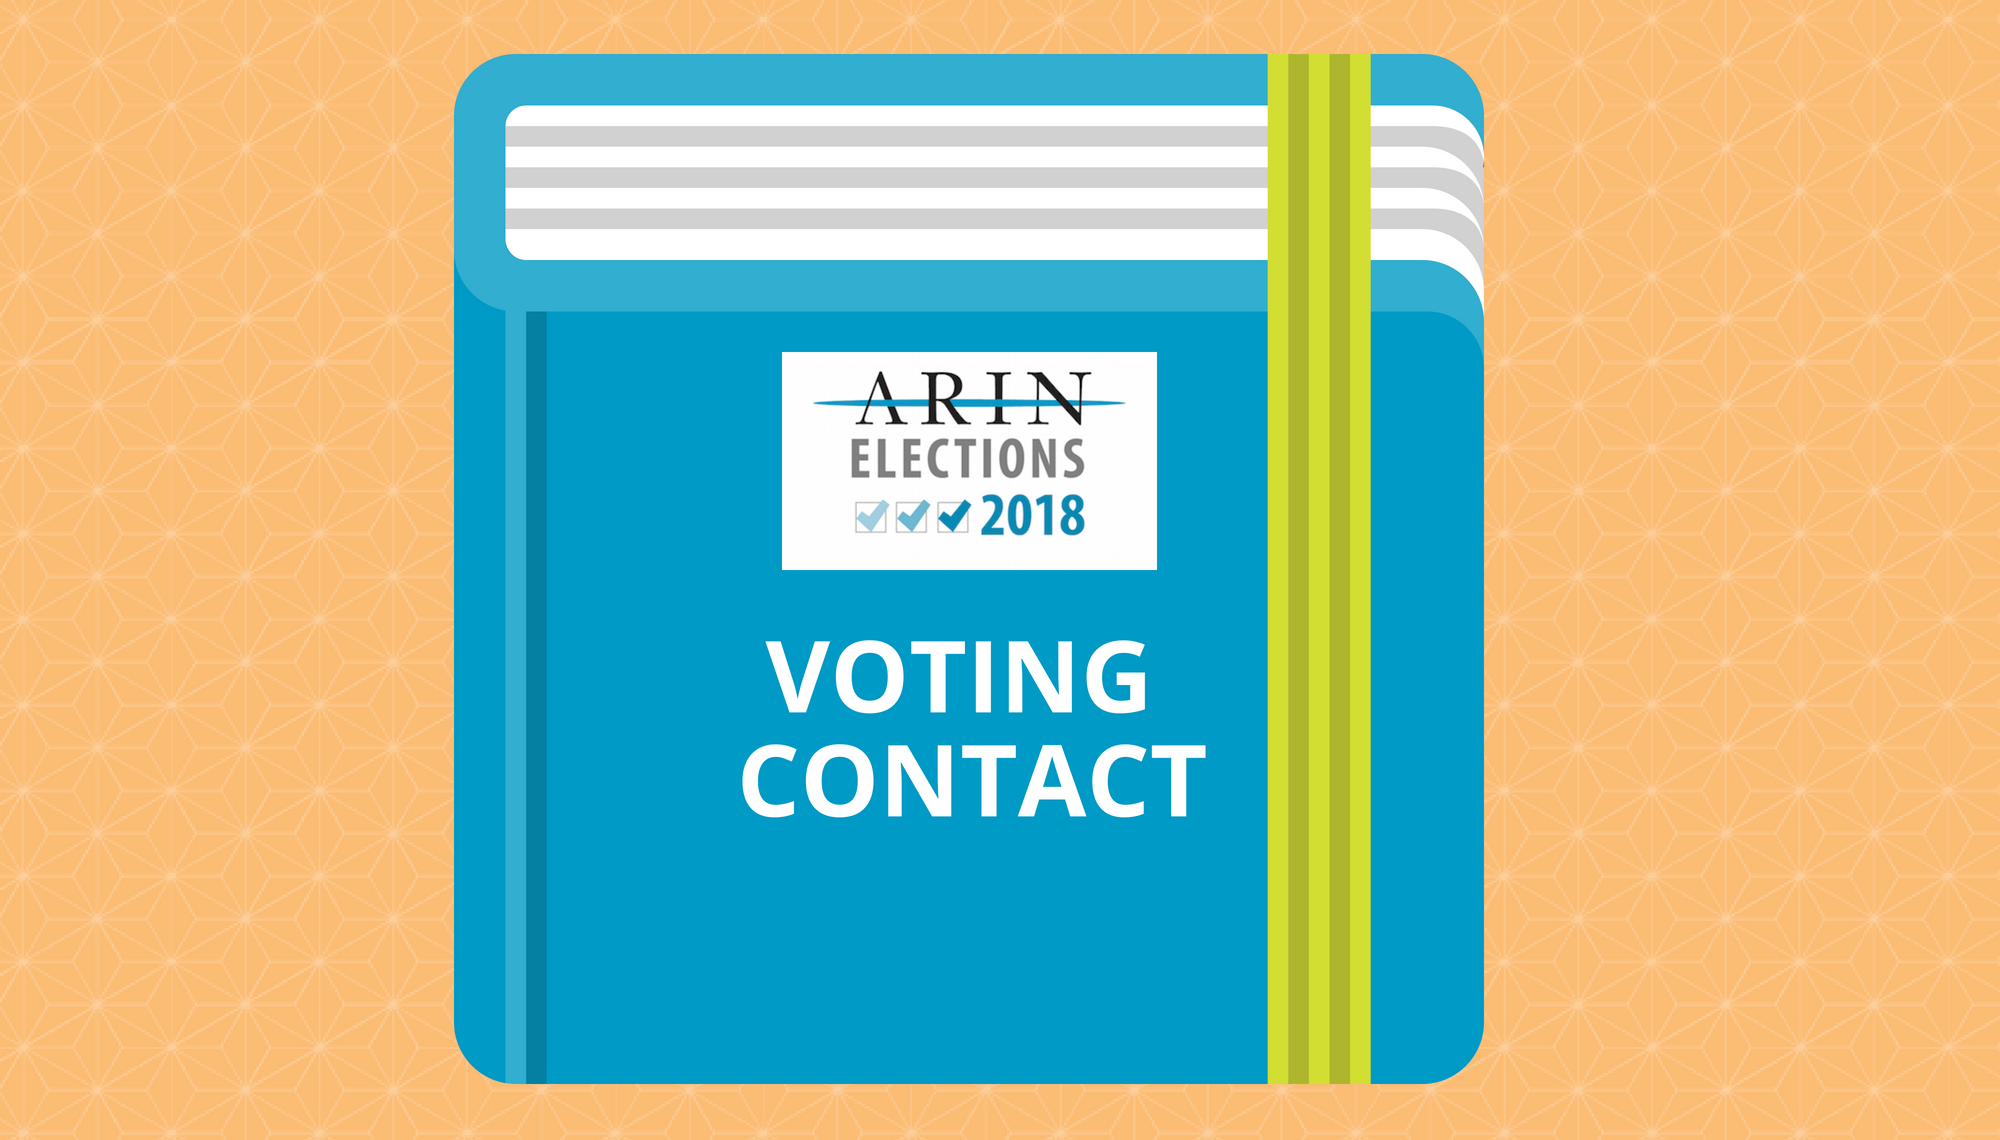 It’s Simple: Review, Update, or Designate an ARIN Voting Contact Today!